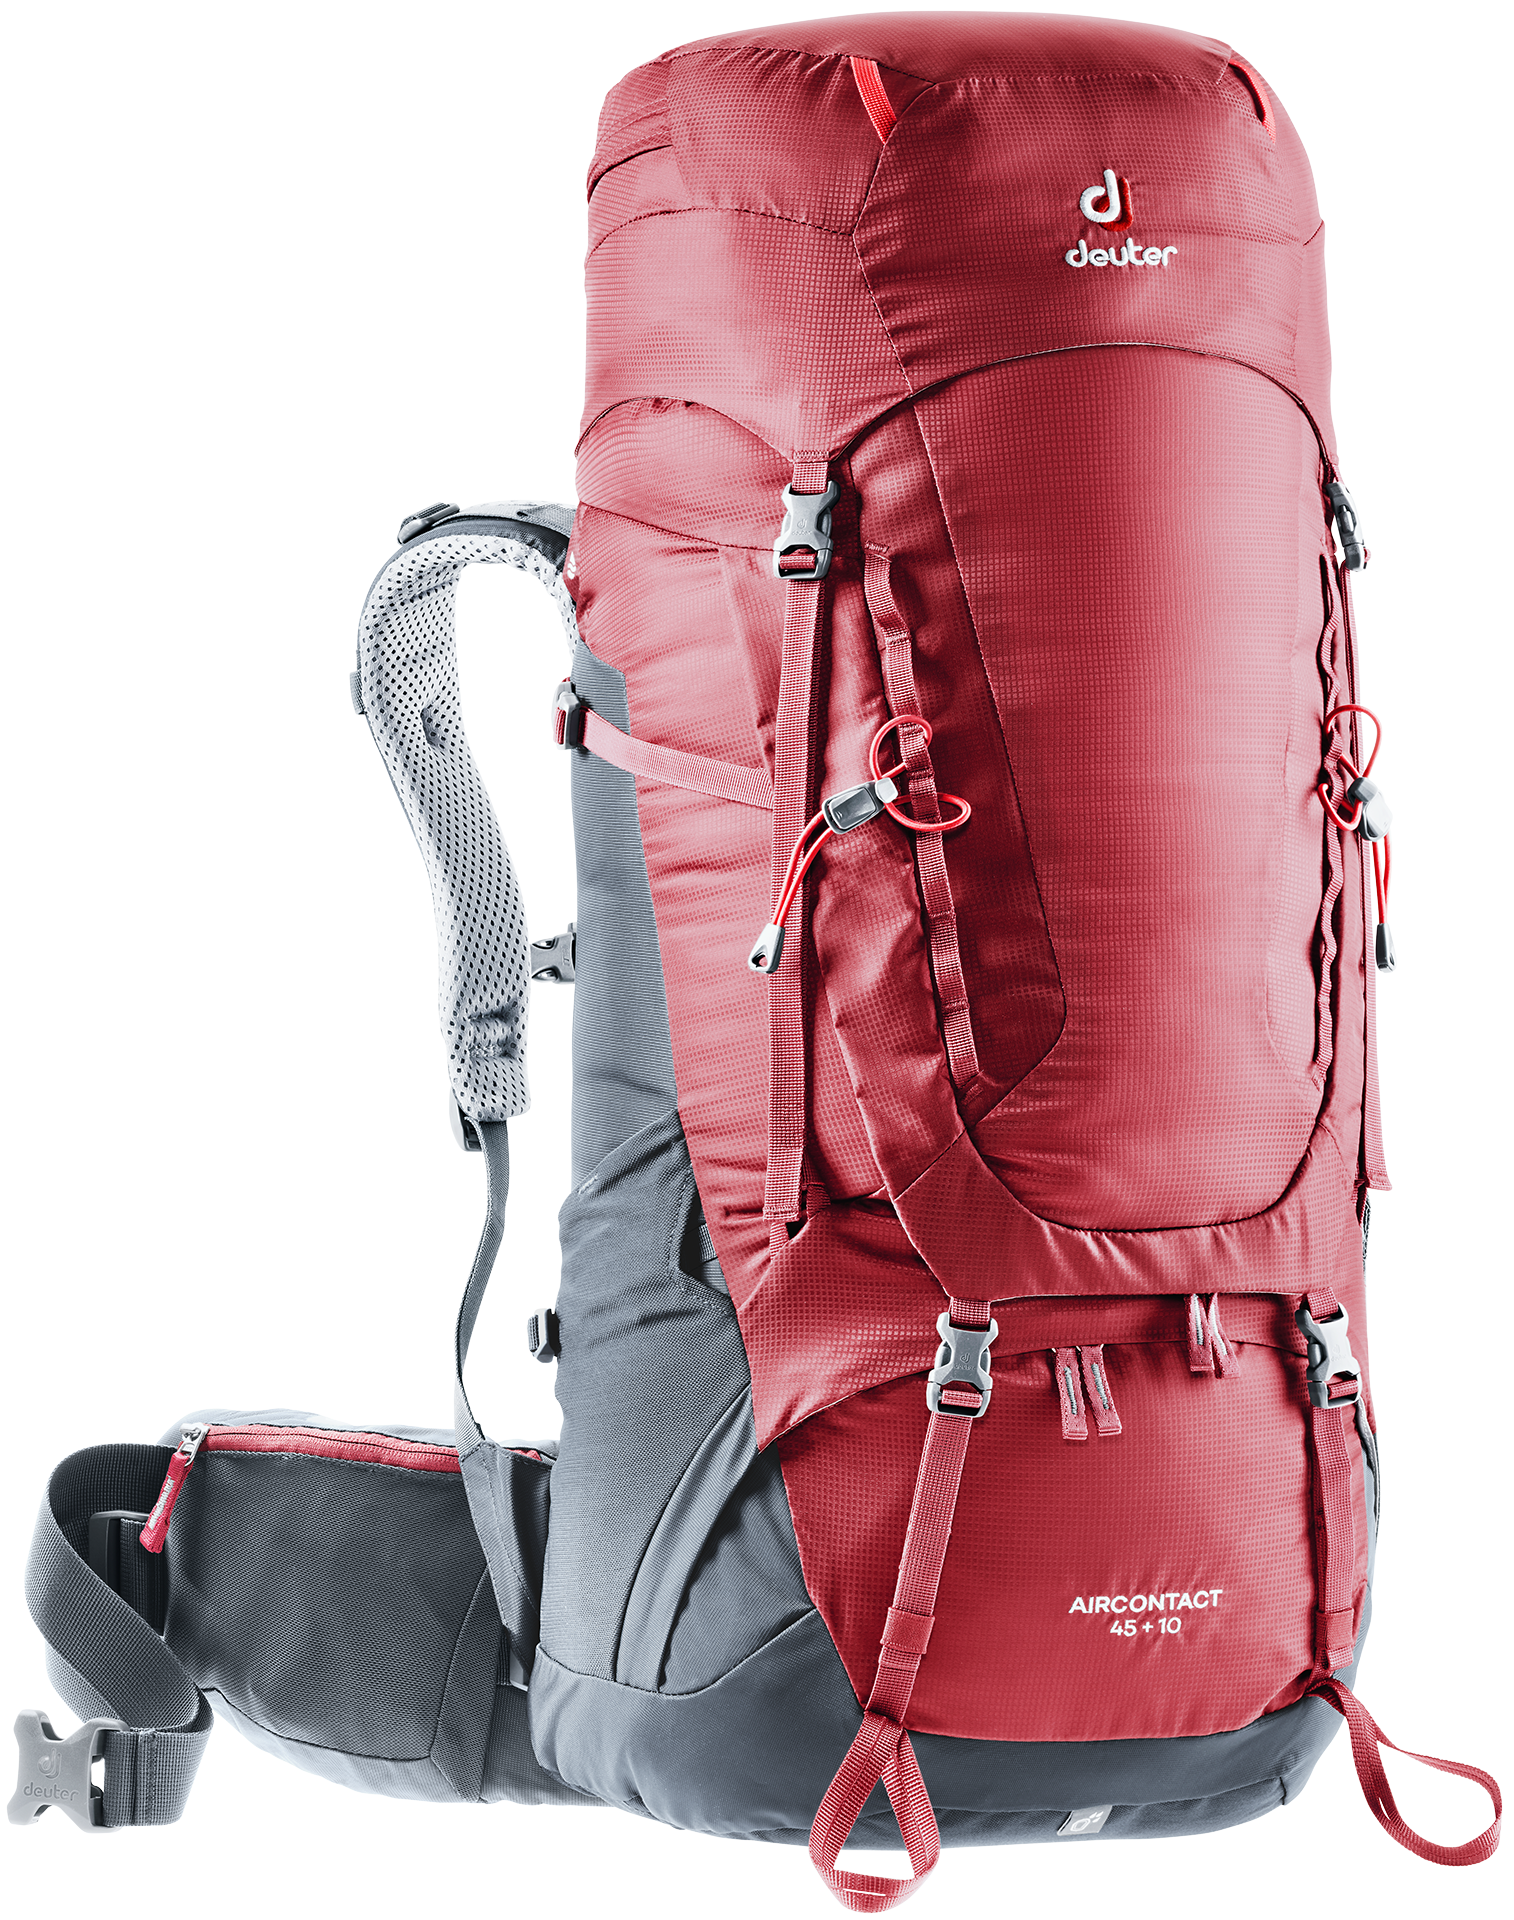 Deuter Aircontact 45+10 Cranberry Graphite Backpack